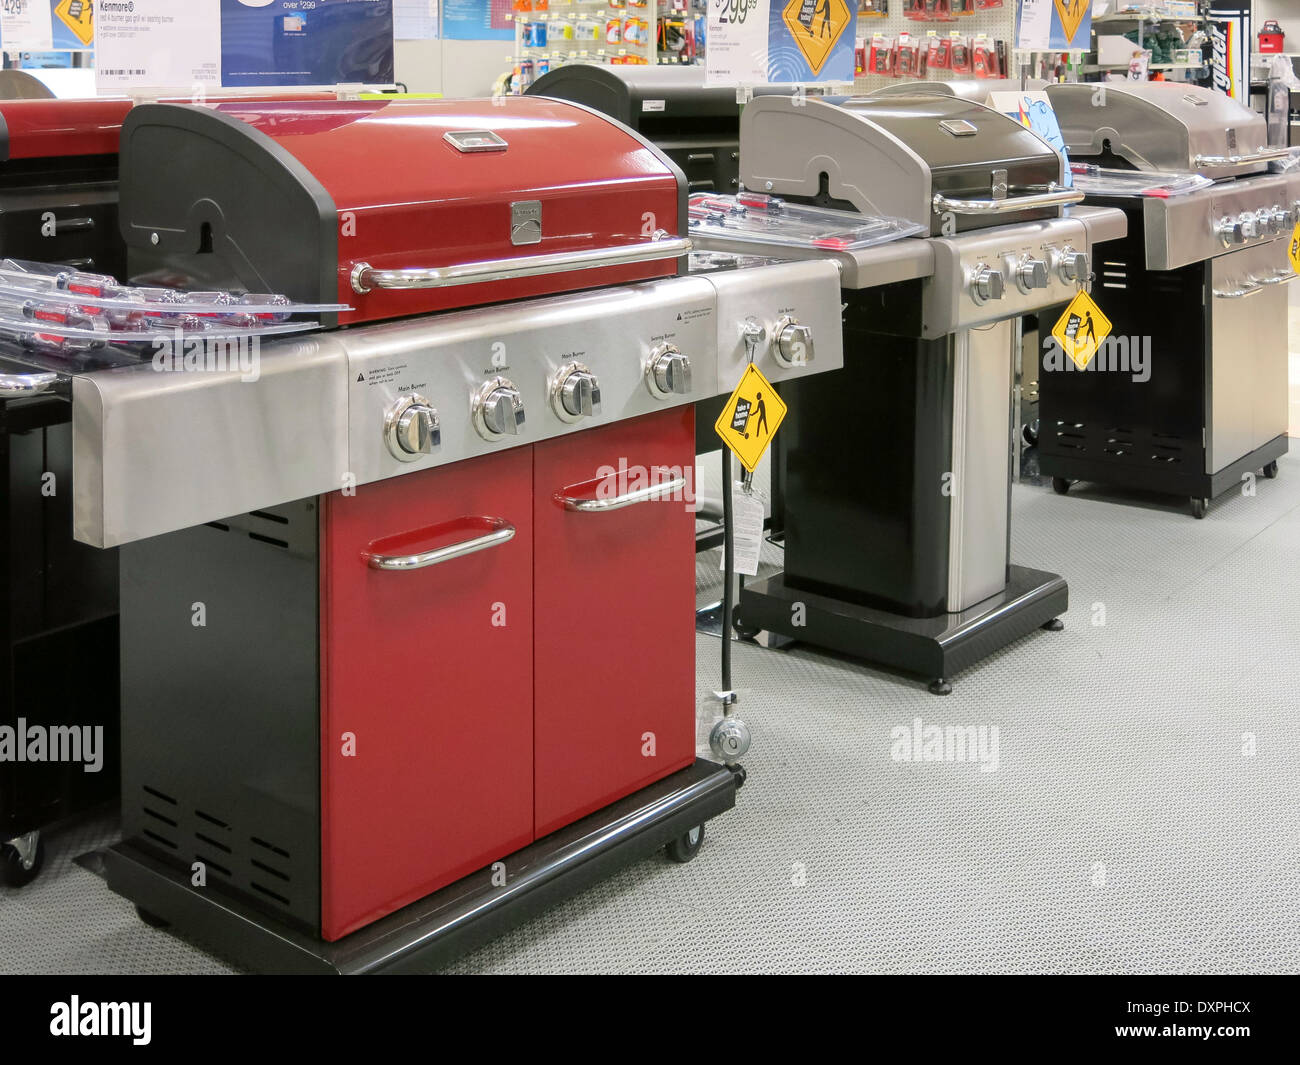 Kenmore Stainless Steel Gas Grills, Outdoor Living Section, Sears Store, WestShore Plaza, Tampa, FL, USA Stock Photo